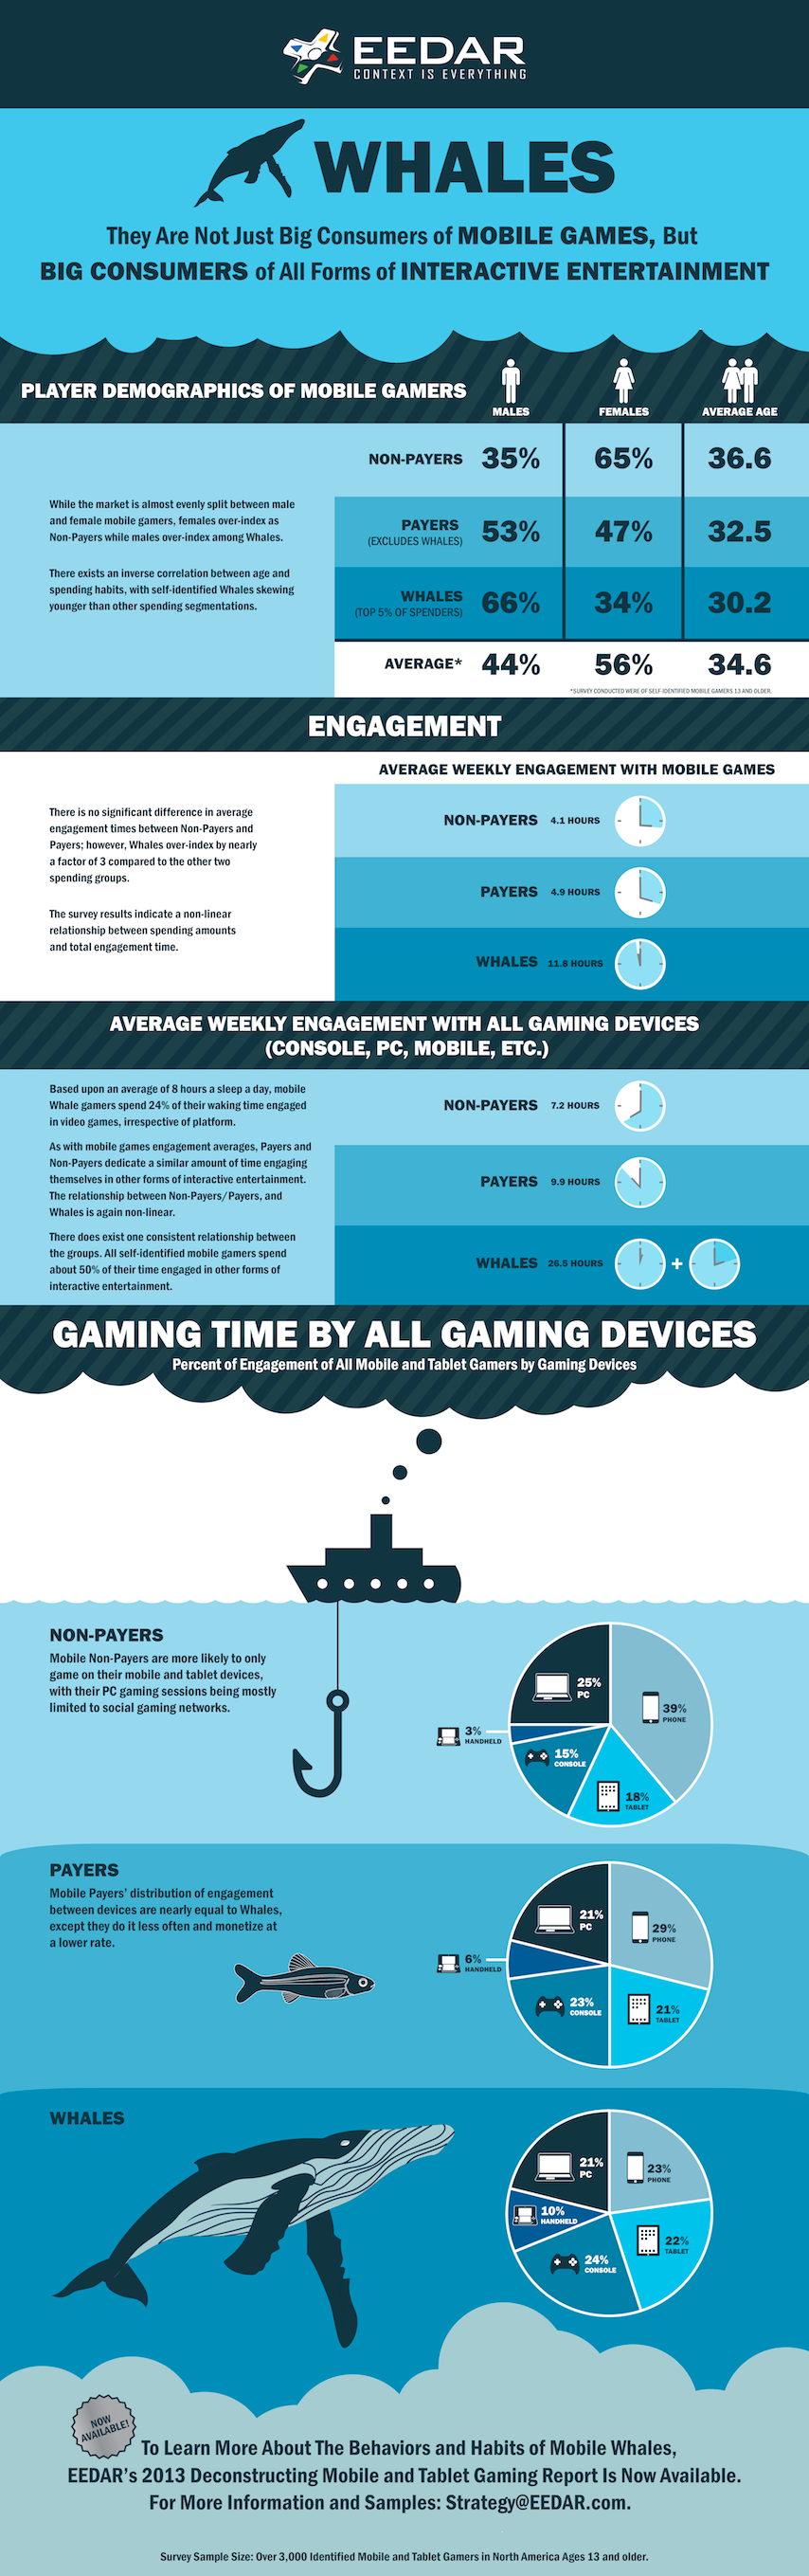 Image for EEDAR report finds typical male gamer spends big on social games